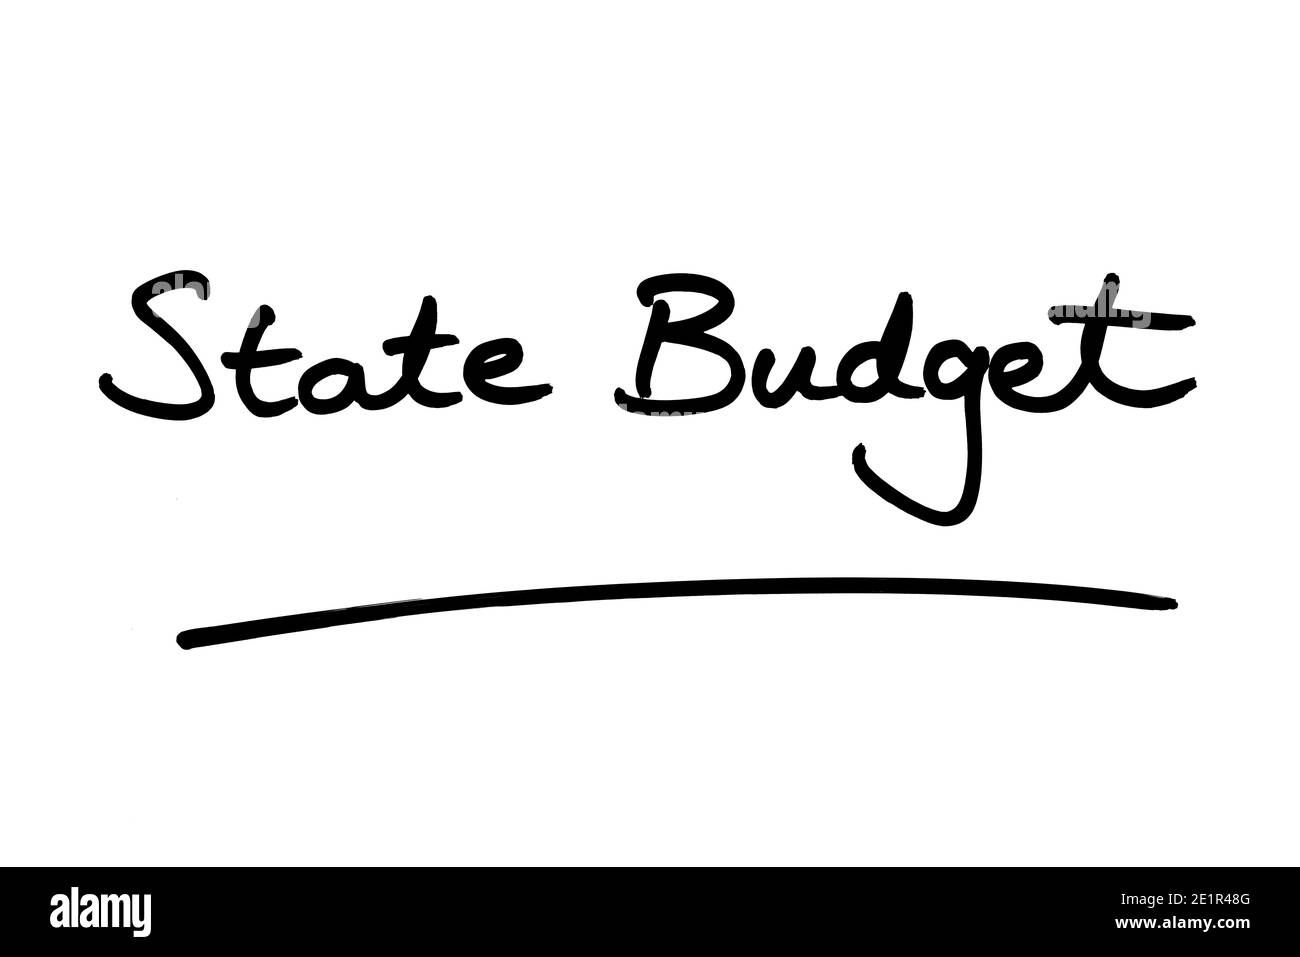 State Budget handwritten on a white background. Stock Photo